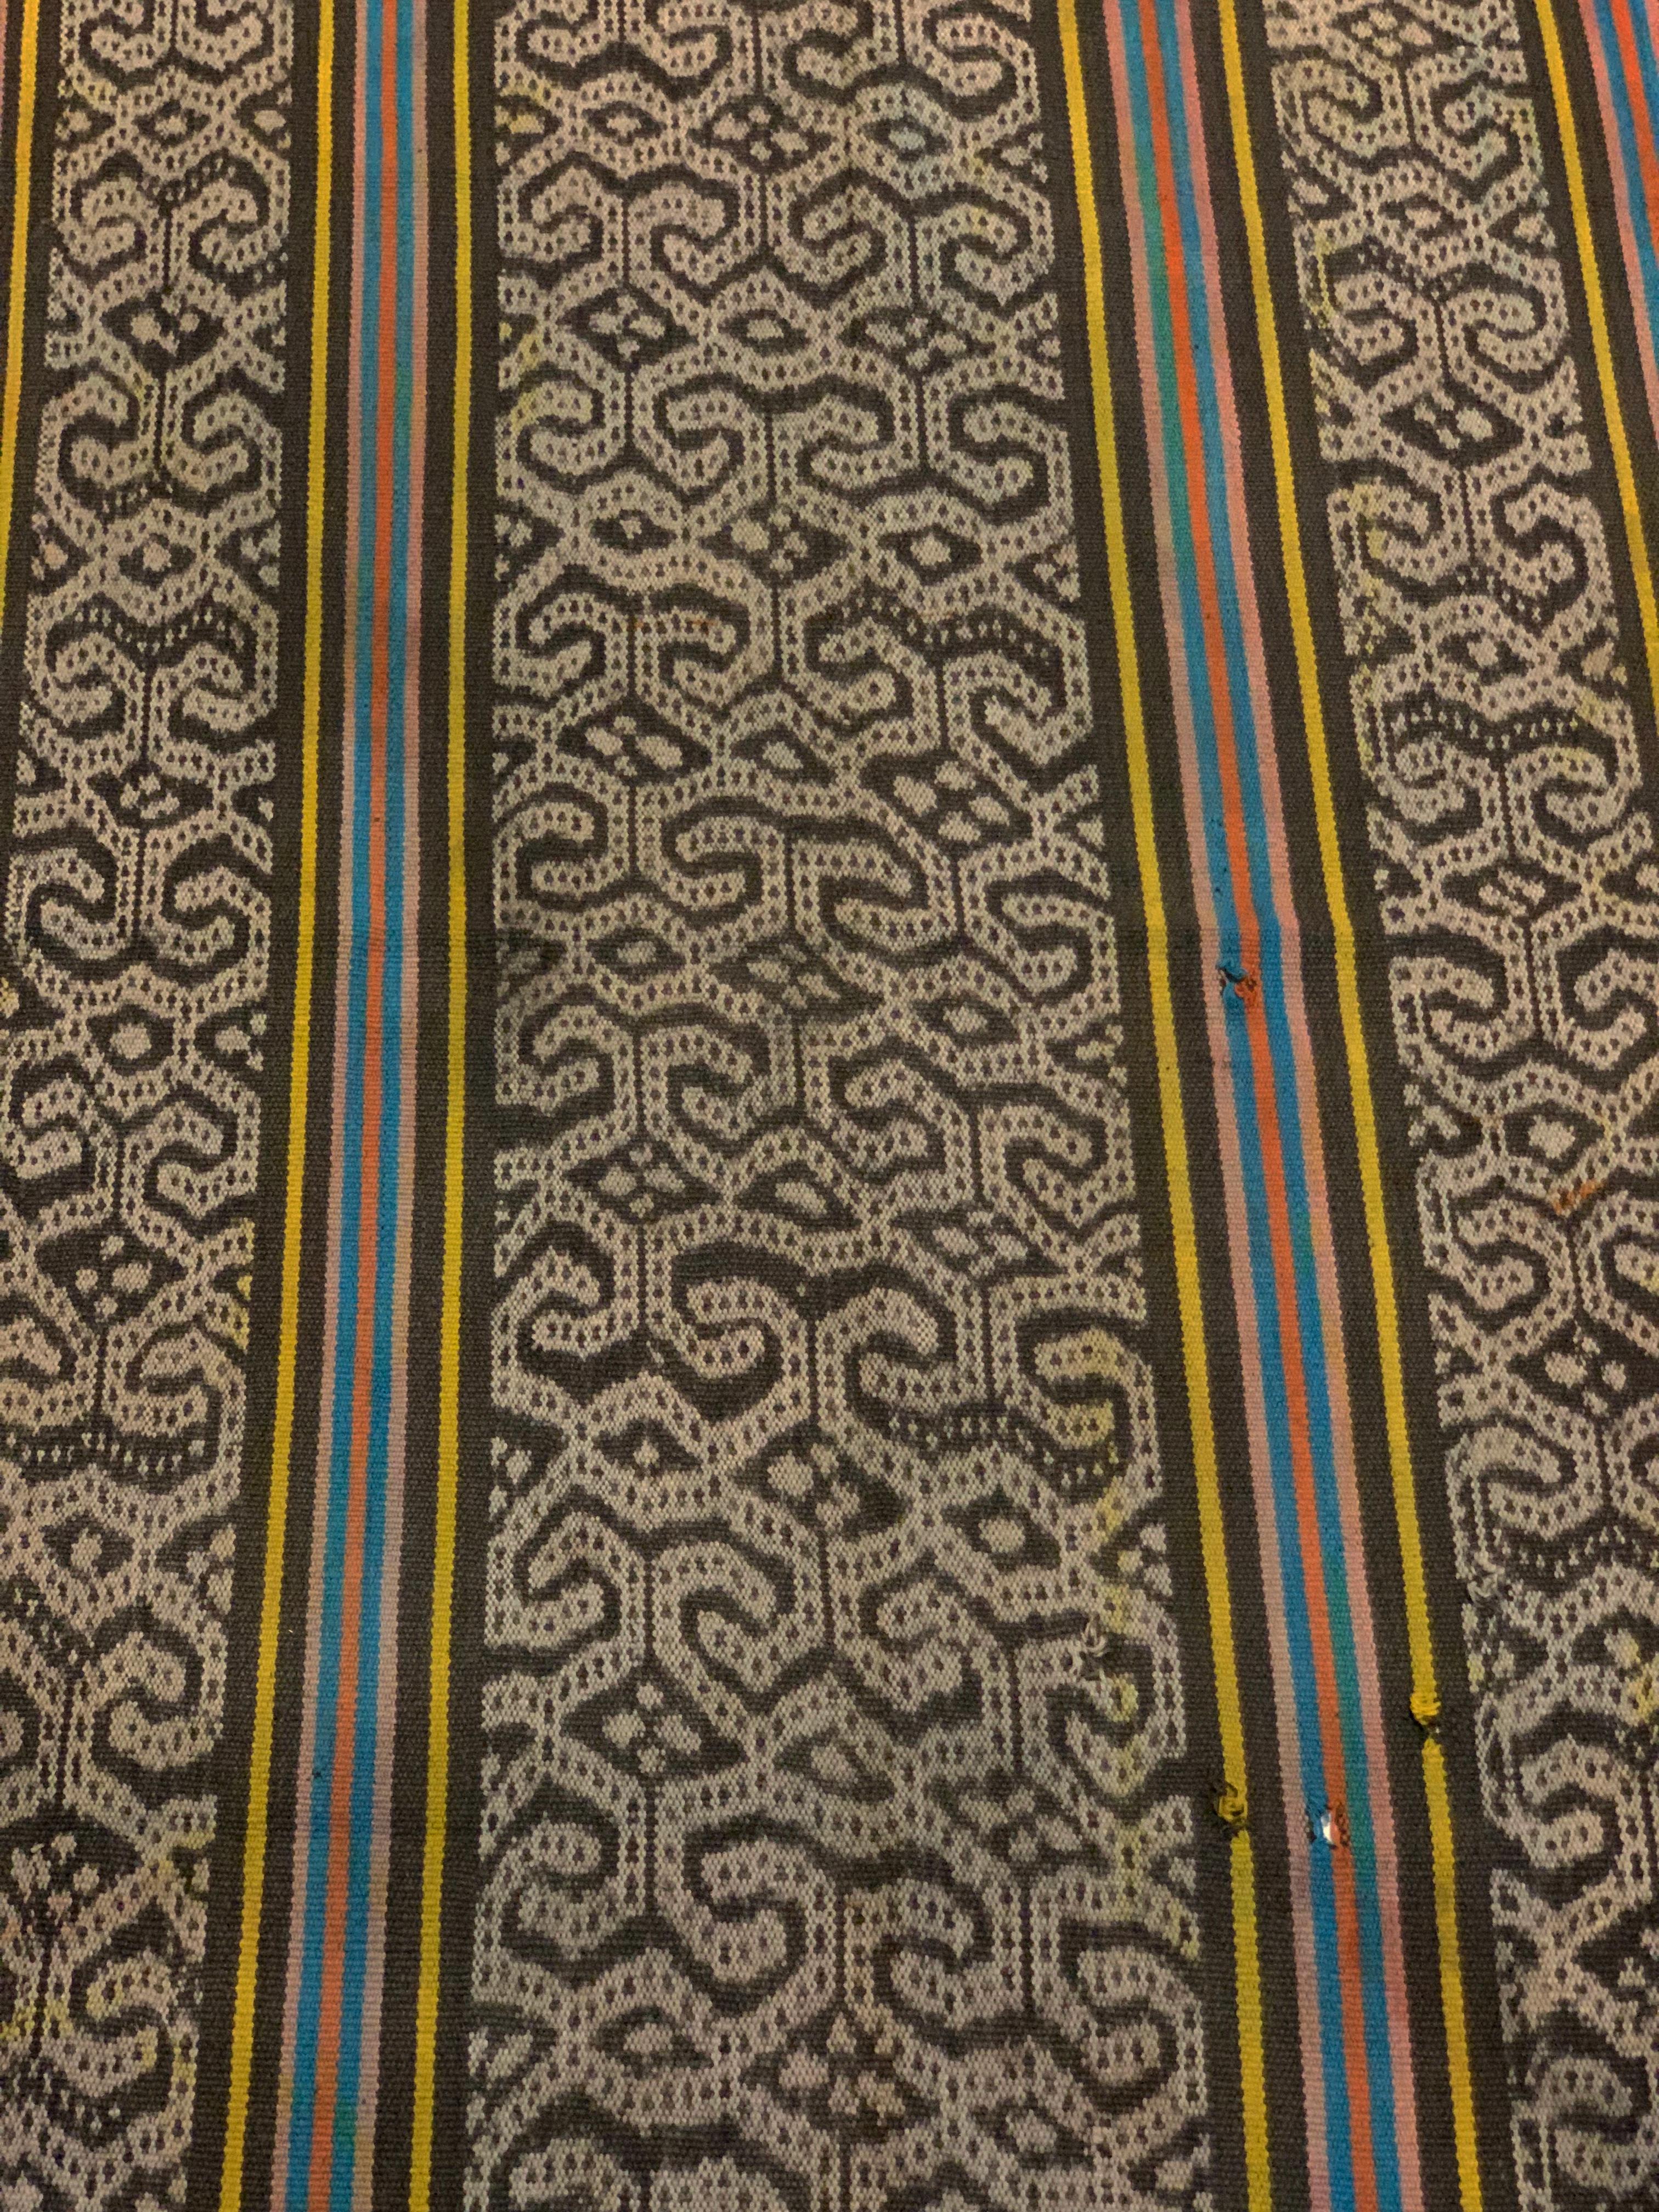 Hand-Woven Long ikat Textile from Sumba Island Tribal Motifs, Indonesia